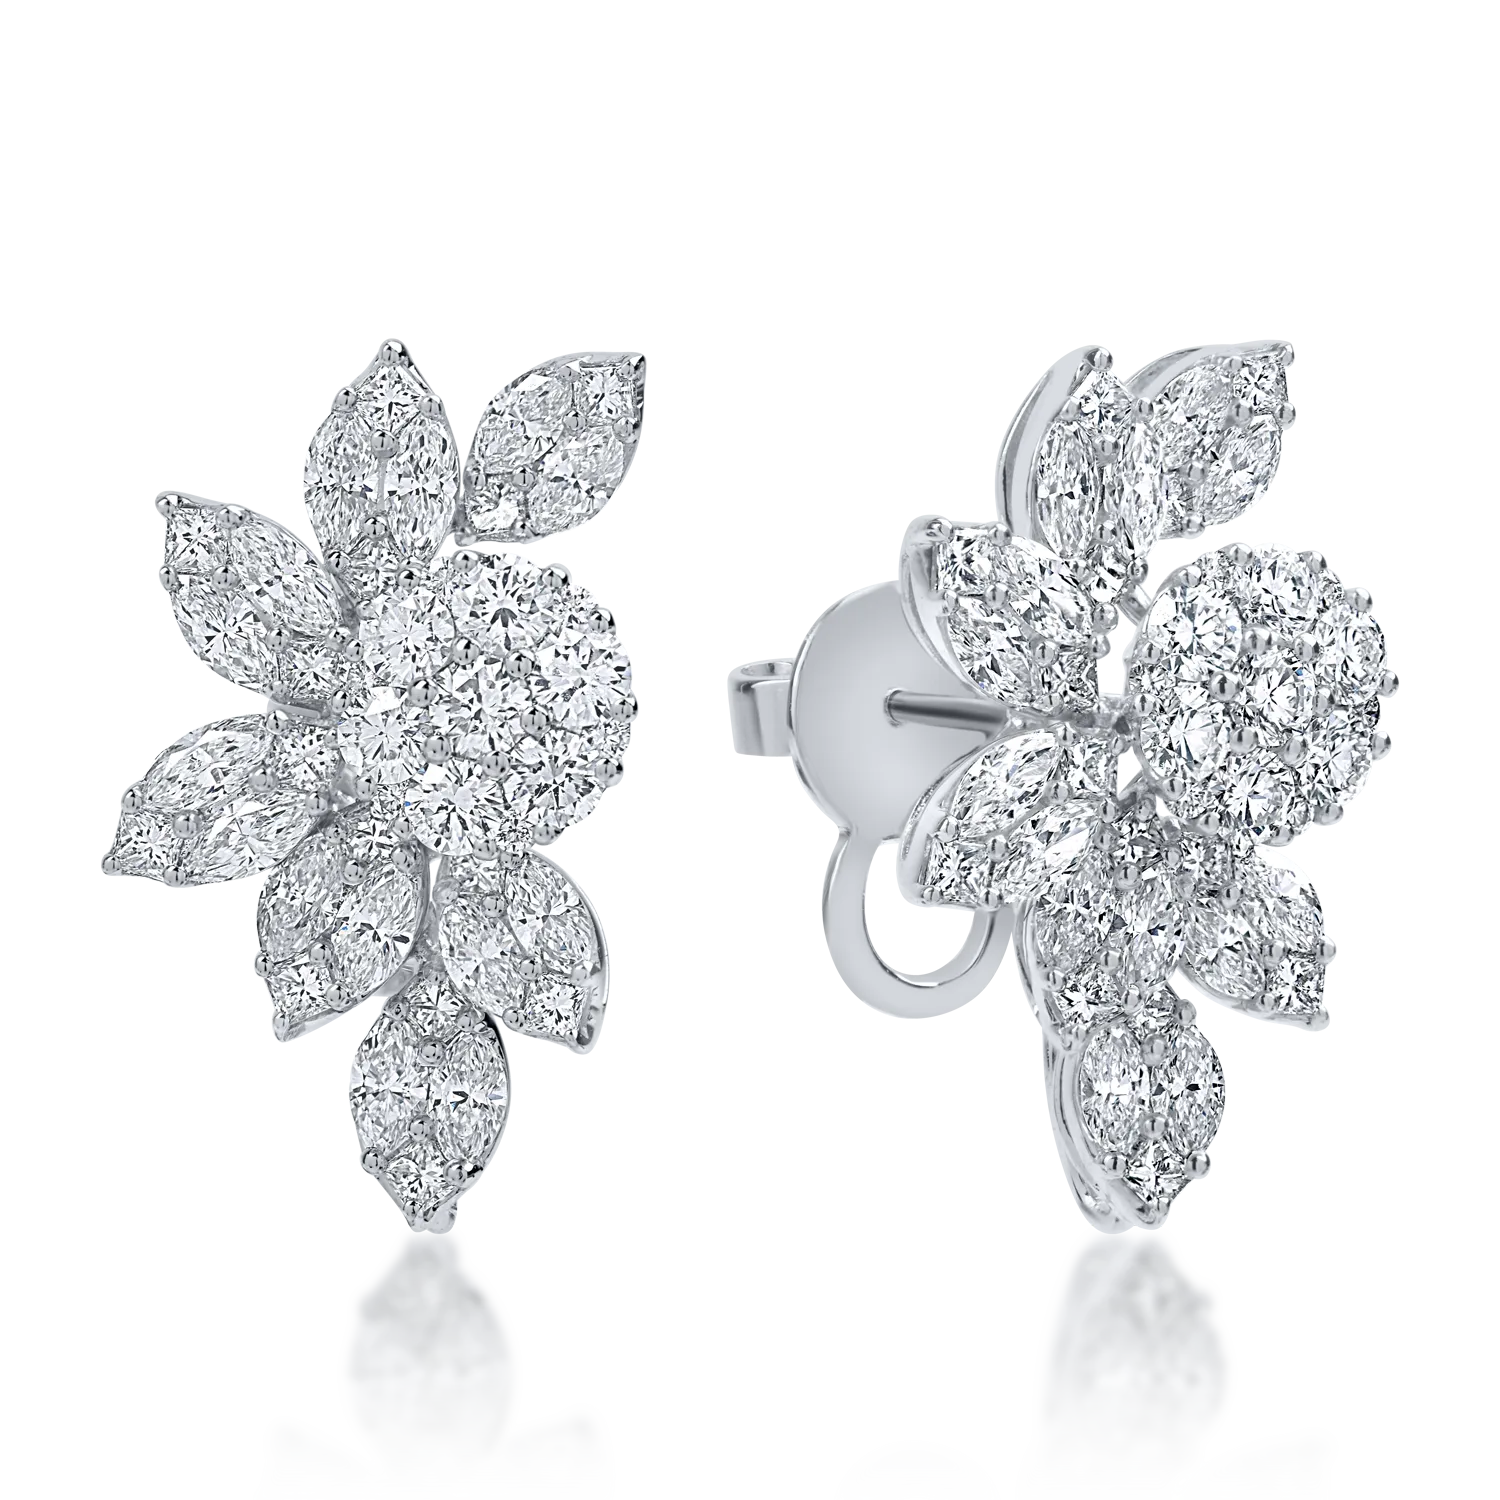 White gold earrings with 3.87ct diamonds